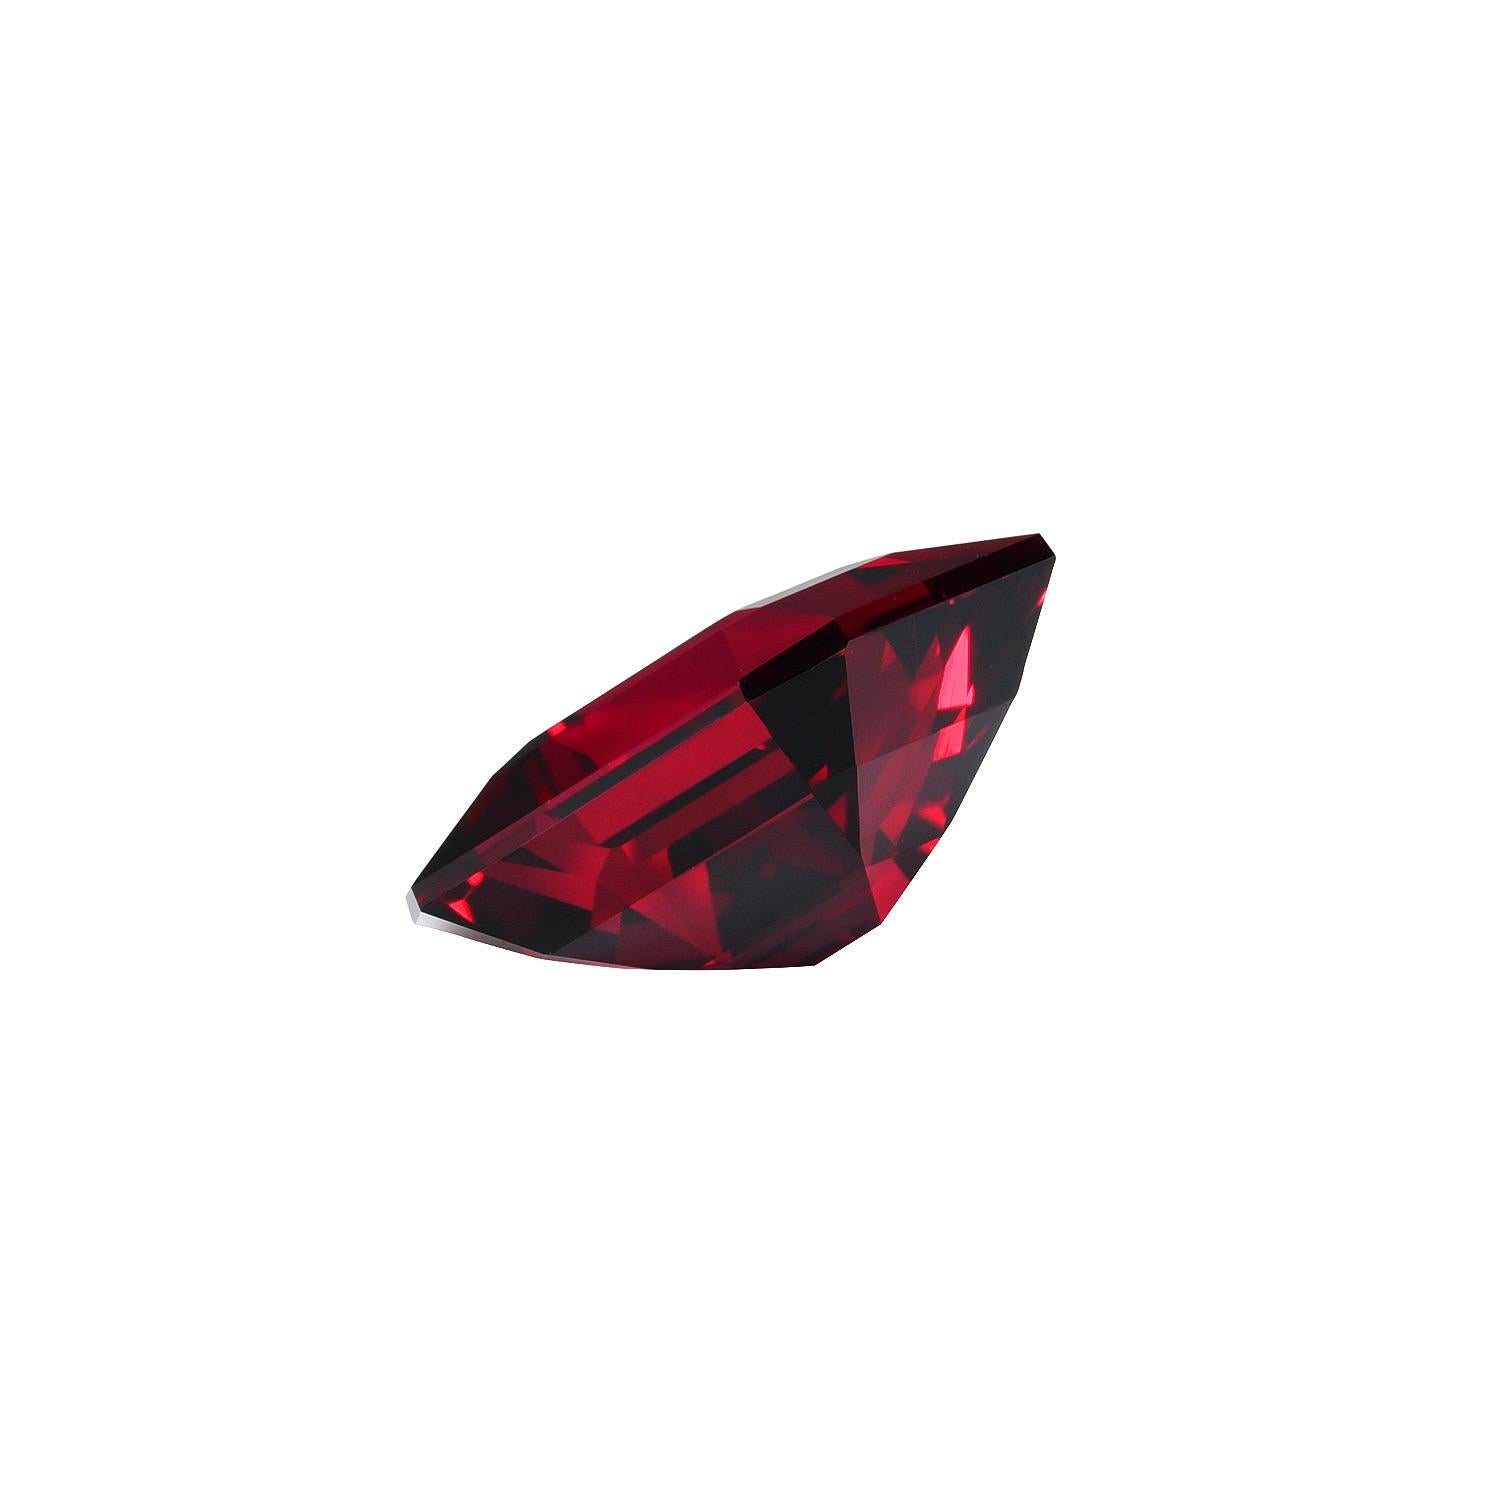 Contemporary Red Spinel Ring Stone 5 Carat Emerald Cut Unmounted Loose Gemstone For Sale